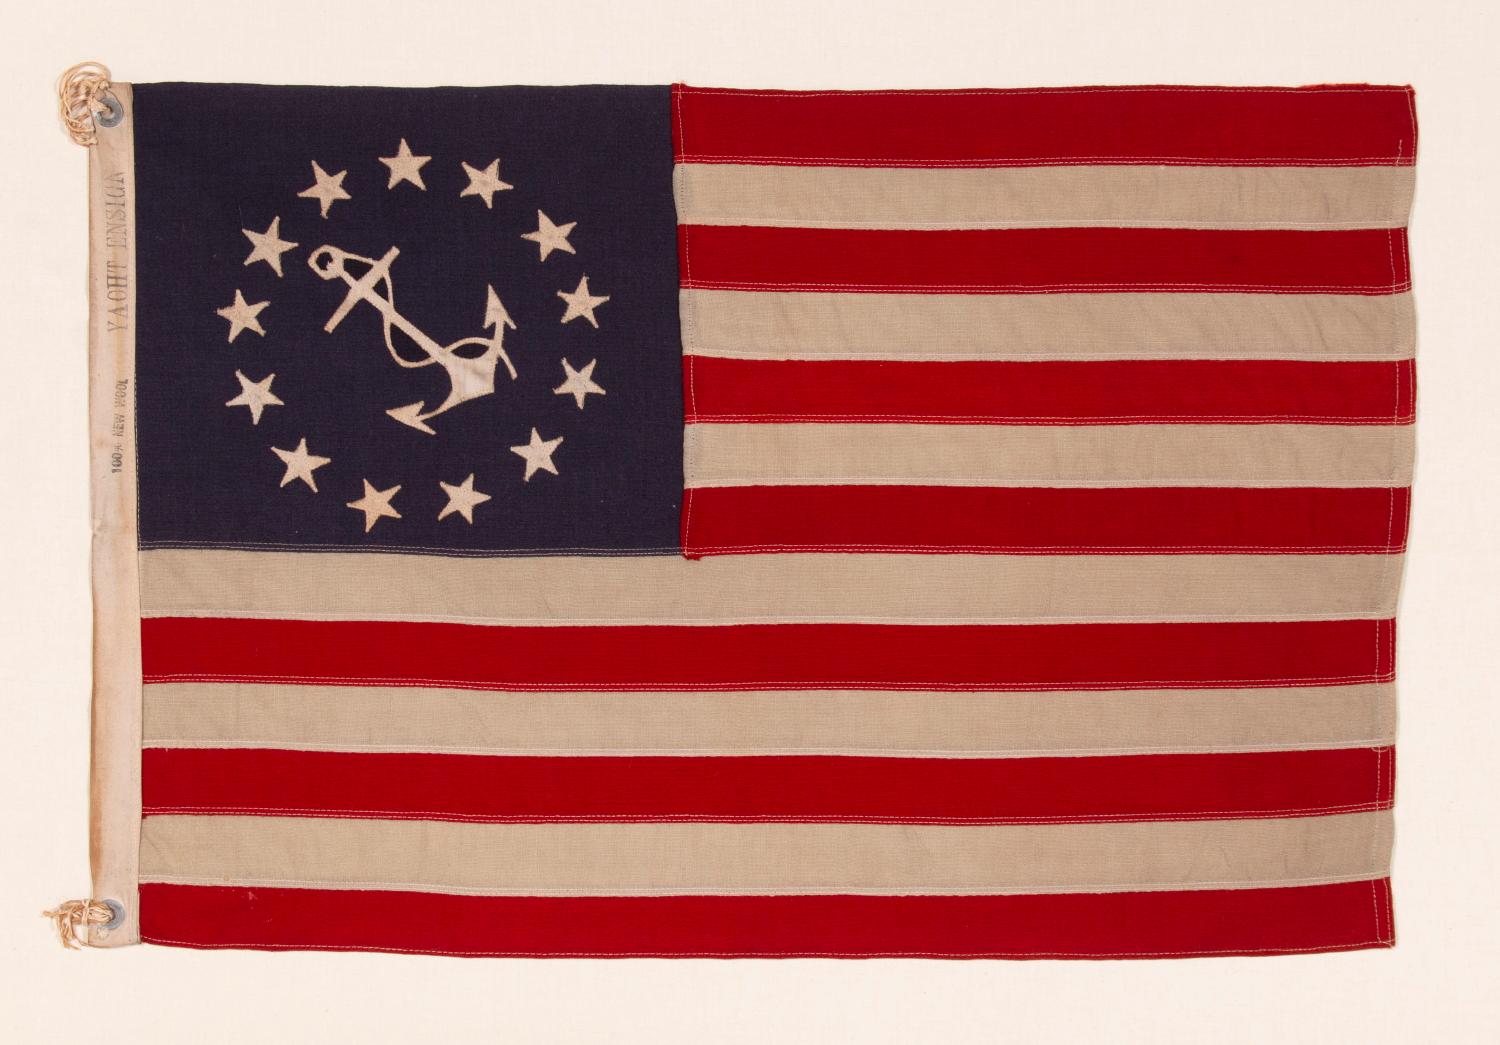 ANTIQUE AMERICAN PRIVATE YACHT FLAG (ENSIGN) WITH 13 STARS SURROUNDING A CANTED ANCHOR, CIRCA 1910 – 1920’s 

The medallion configuration, 13-star, 13-stripe flag with a canted center anchor was entered into official use in 1848, following an act of